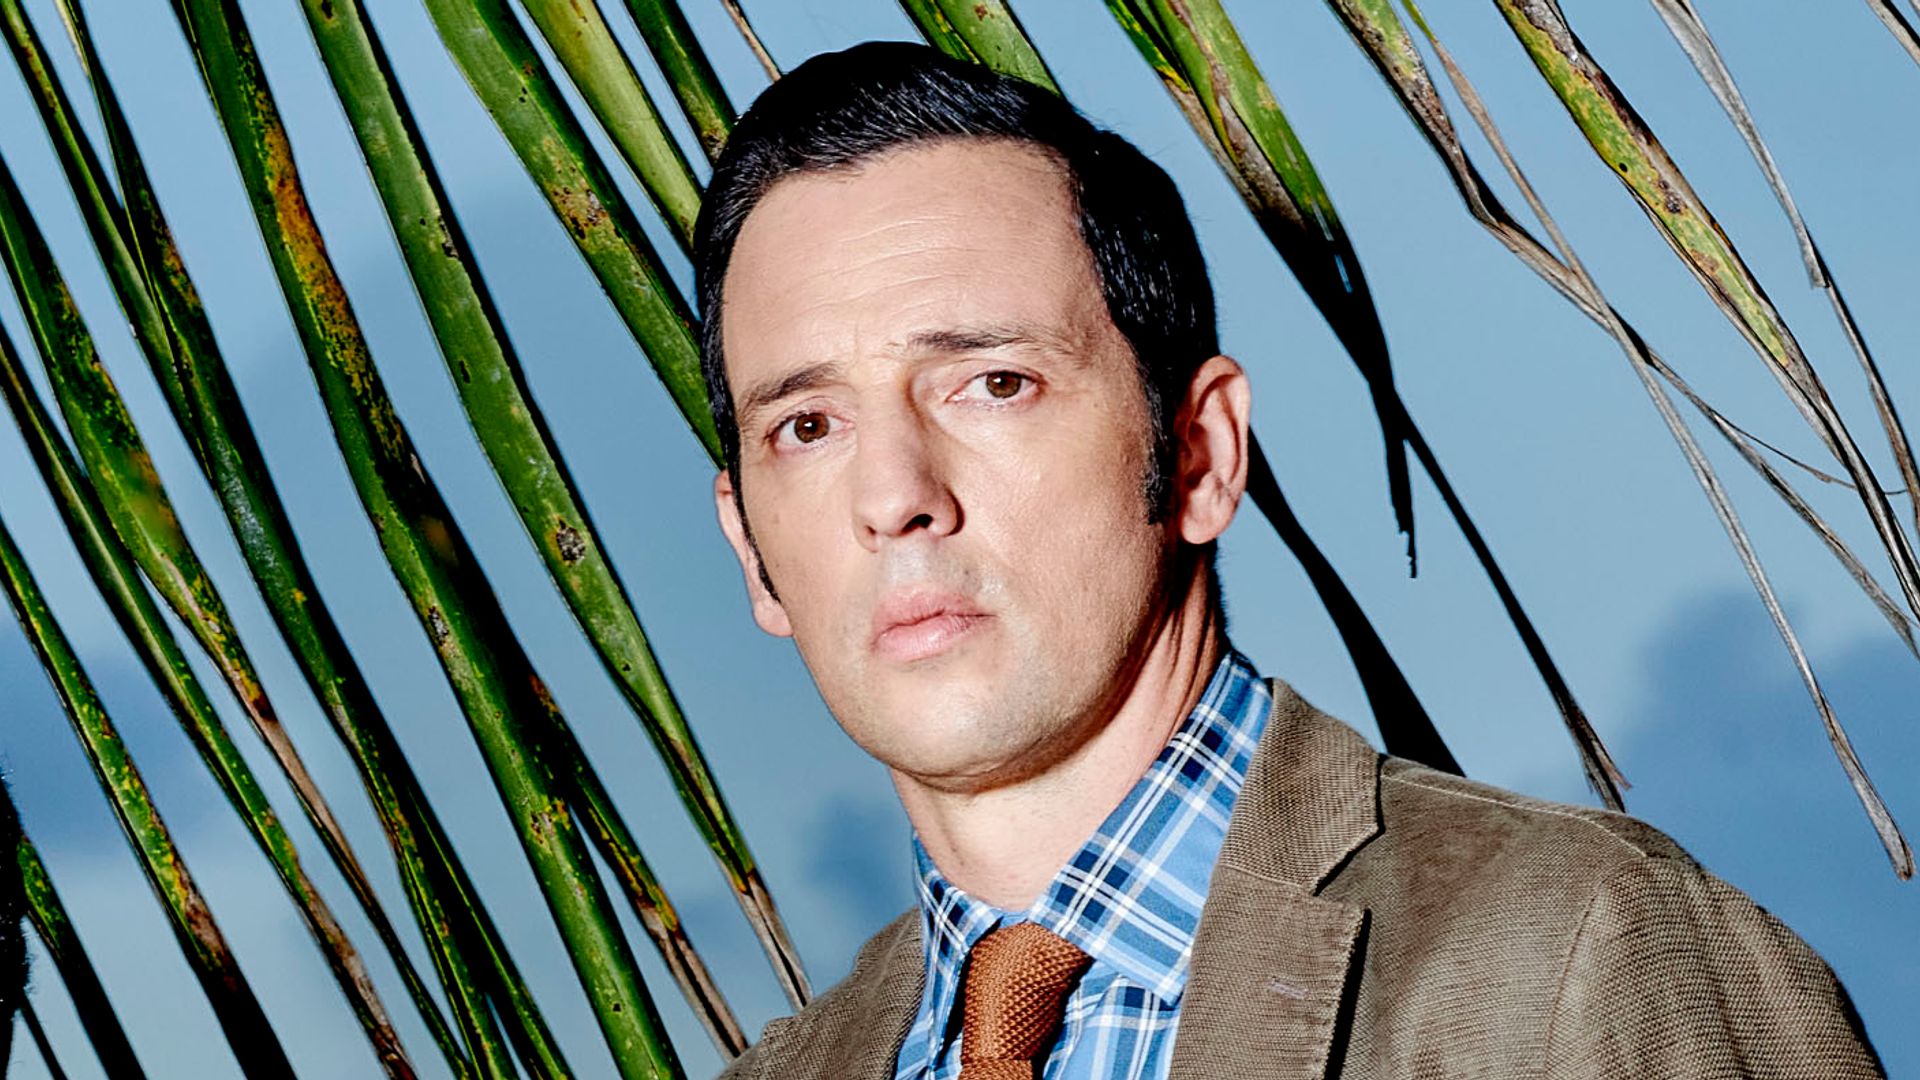 Ralf Little in Death In Paradise